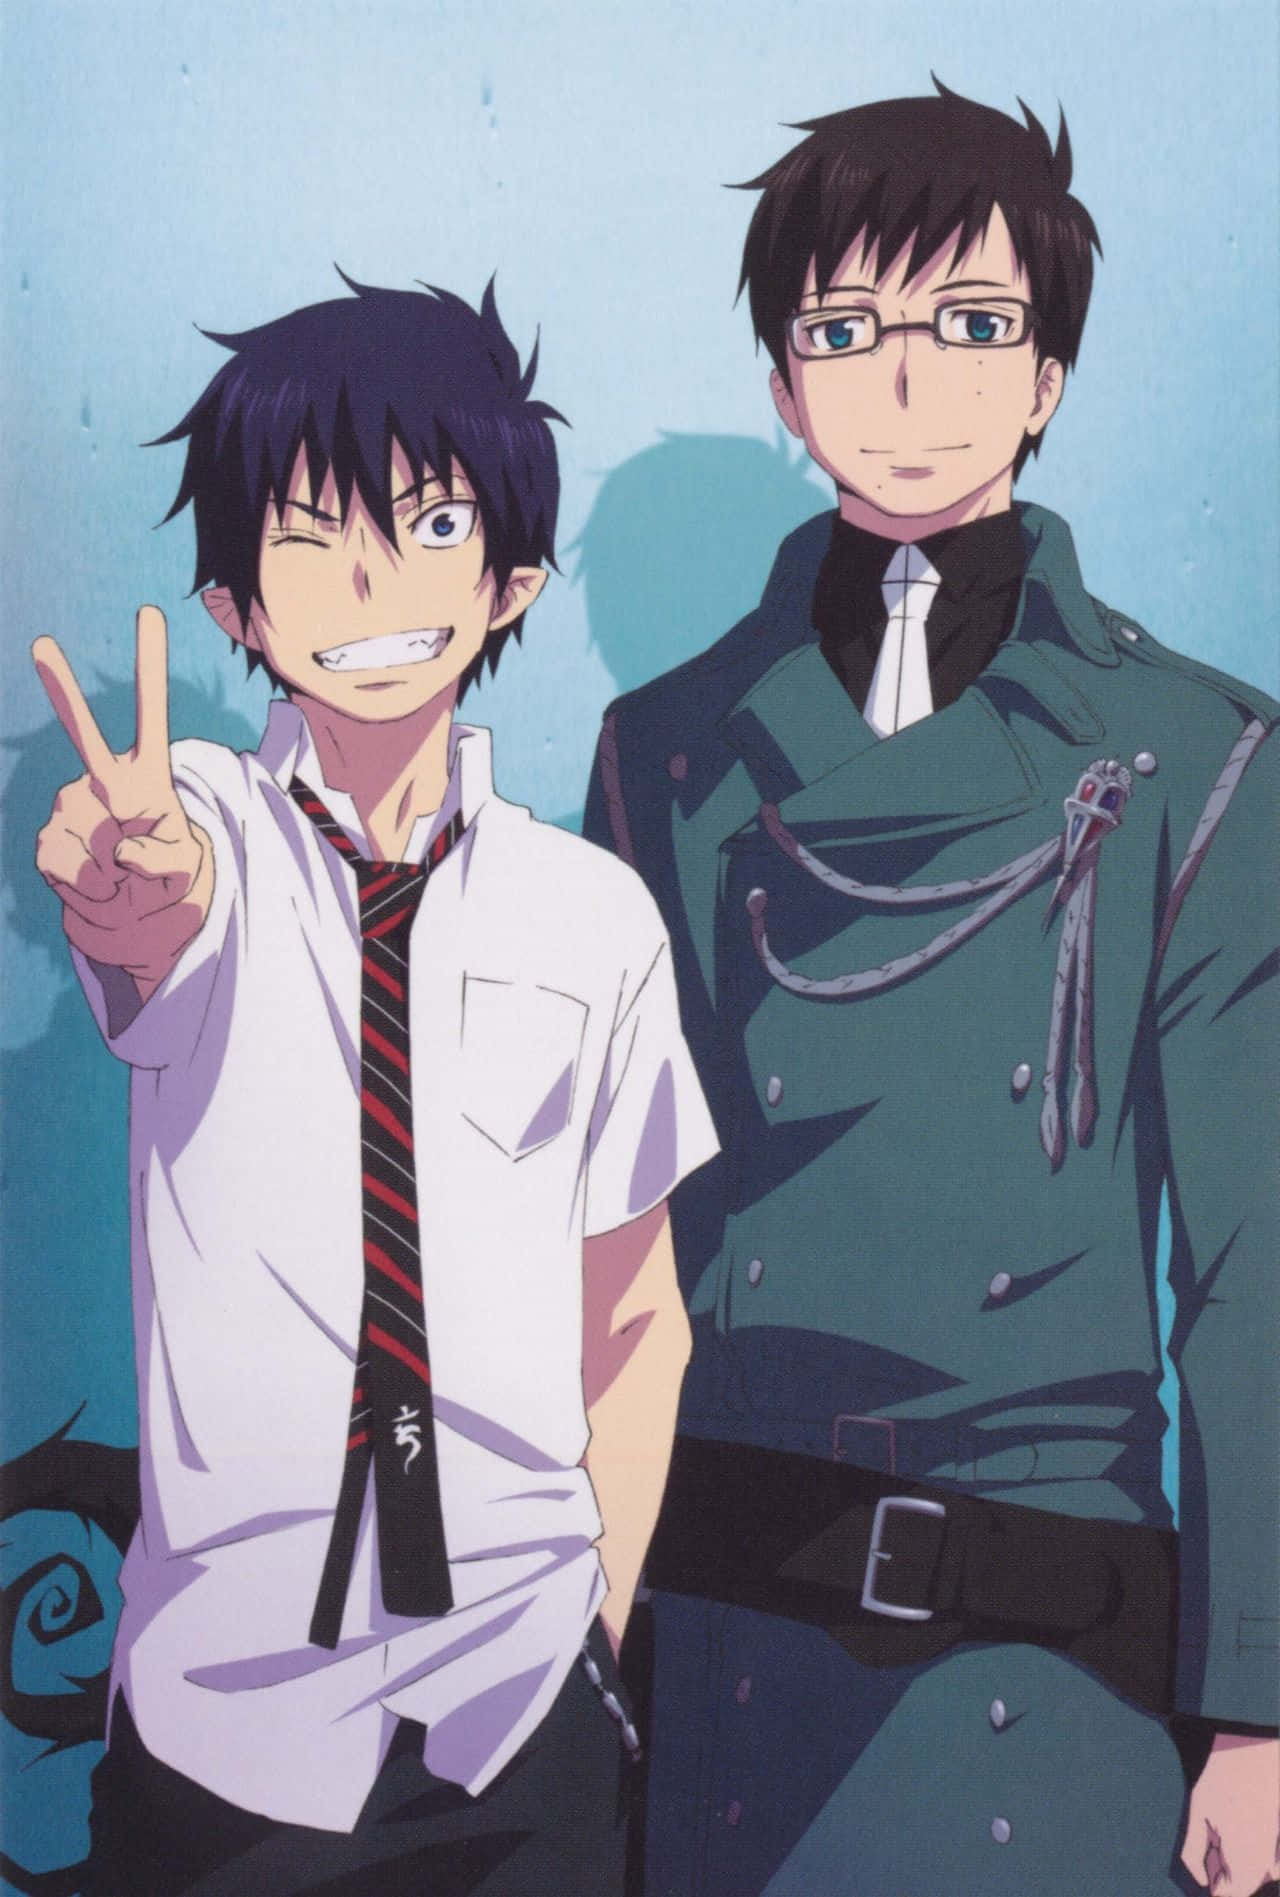 "The world of Blue Exorcist - Rin Okumura and his twin brother Yukio explore the Exorcists' world and the supernatural!"